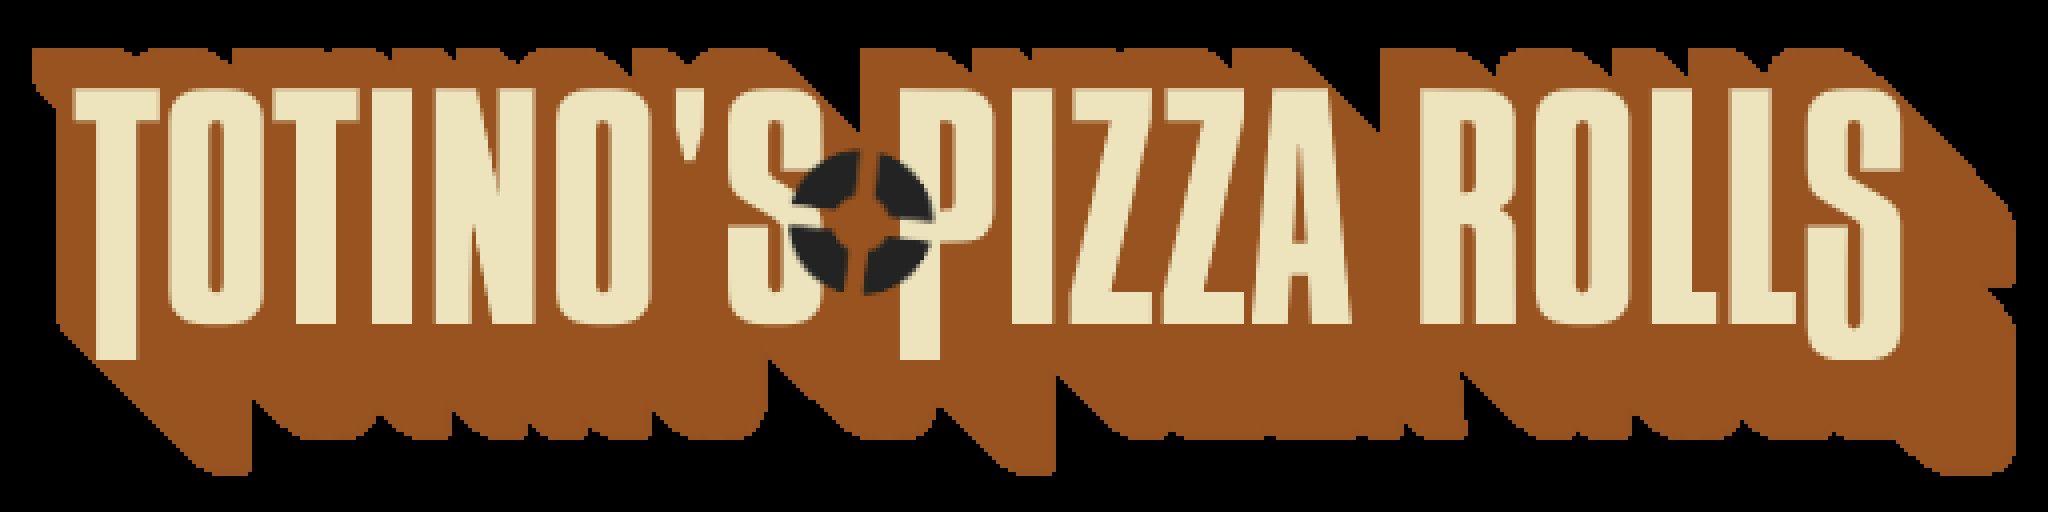 Totino's Logo - Totino's Pizza Rolls logo replacement. Team Fortress 2 GUI Mods